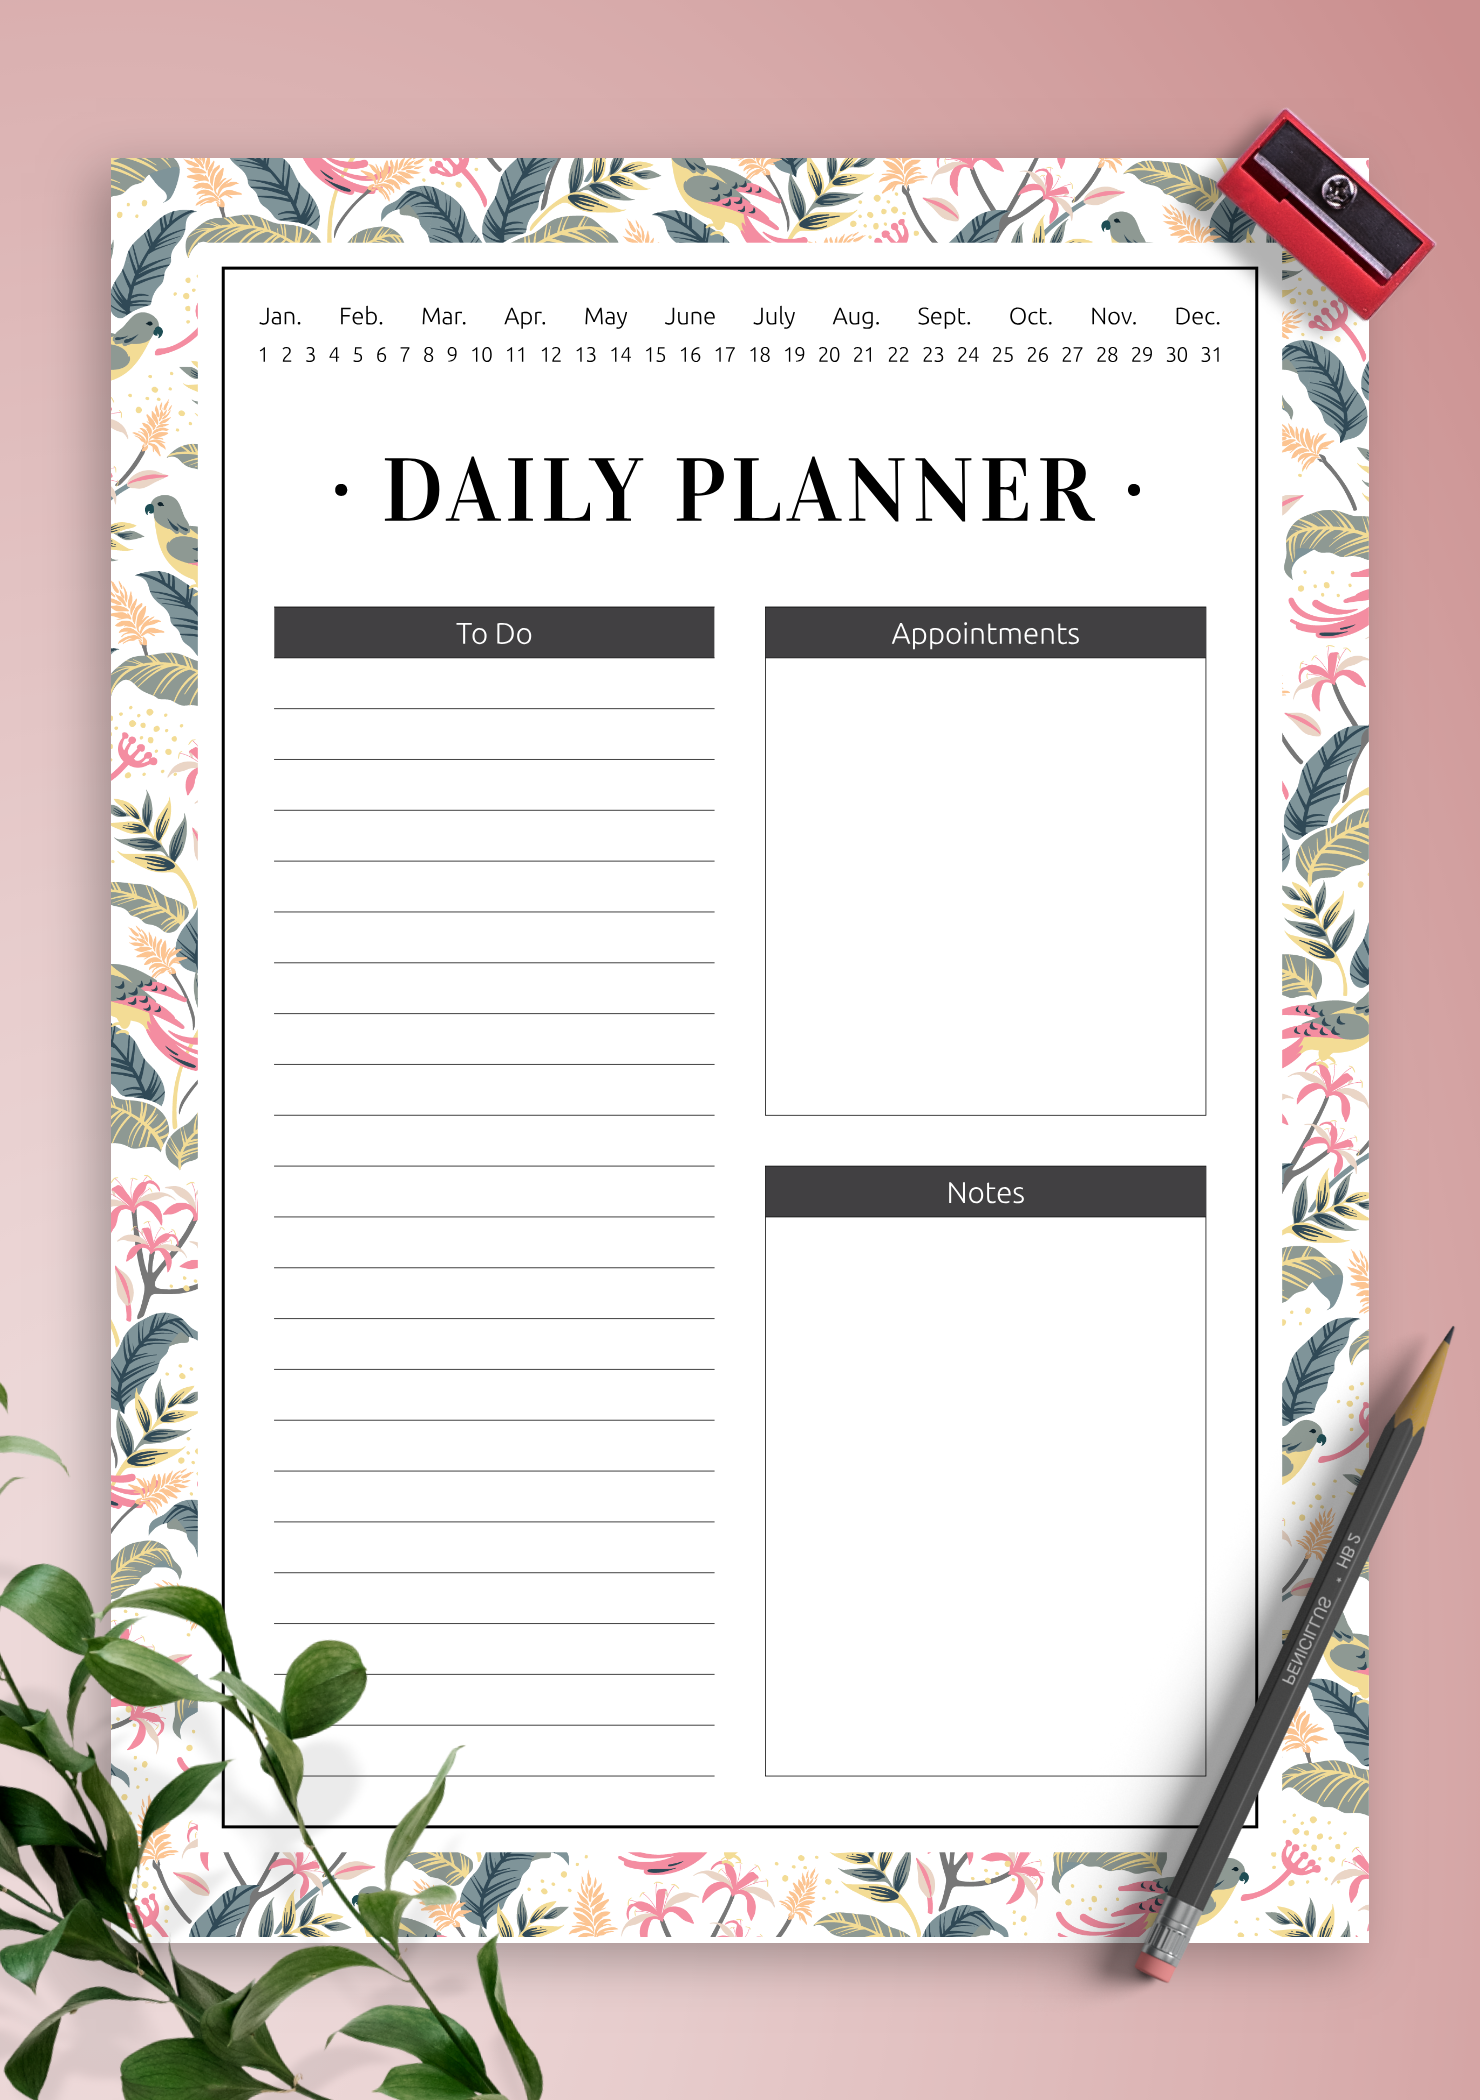 Download Printable Undated Daily Planner with To-Do list PDF